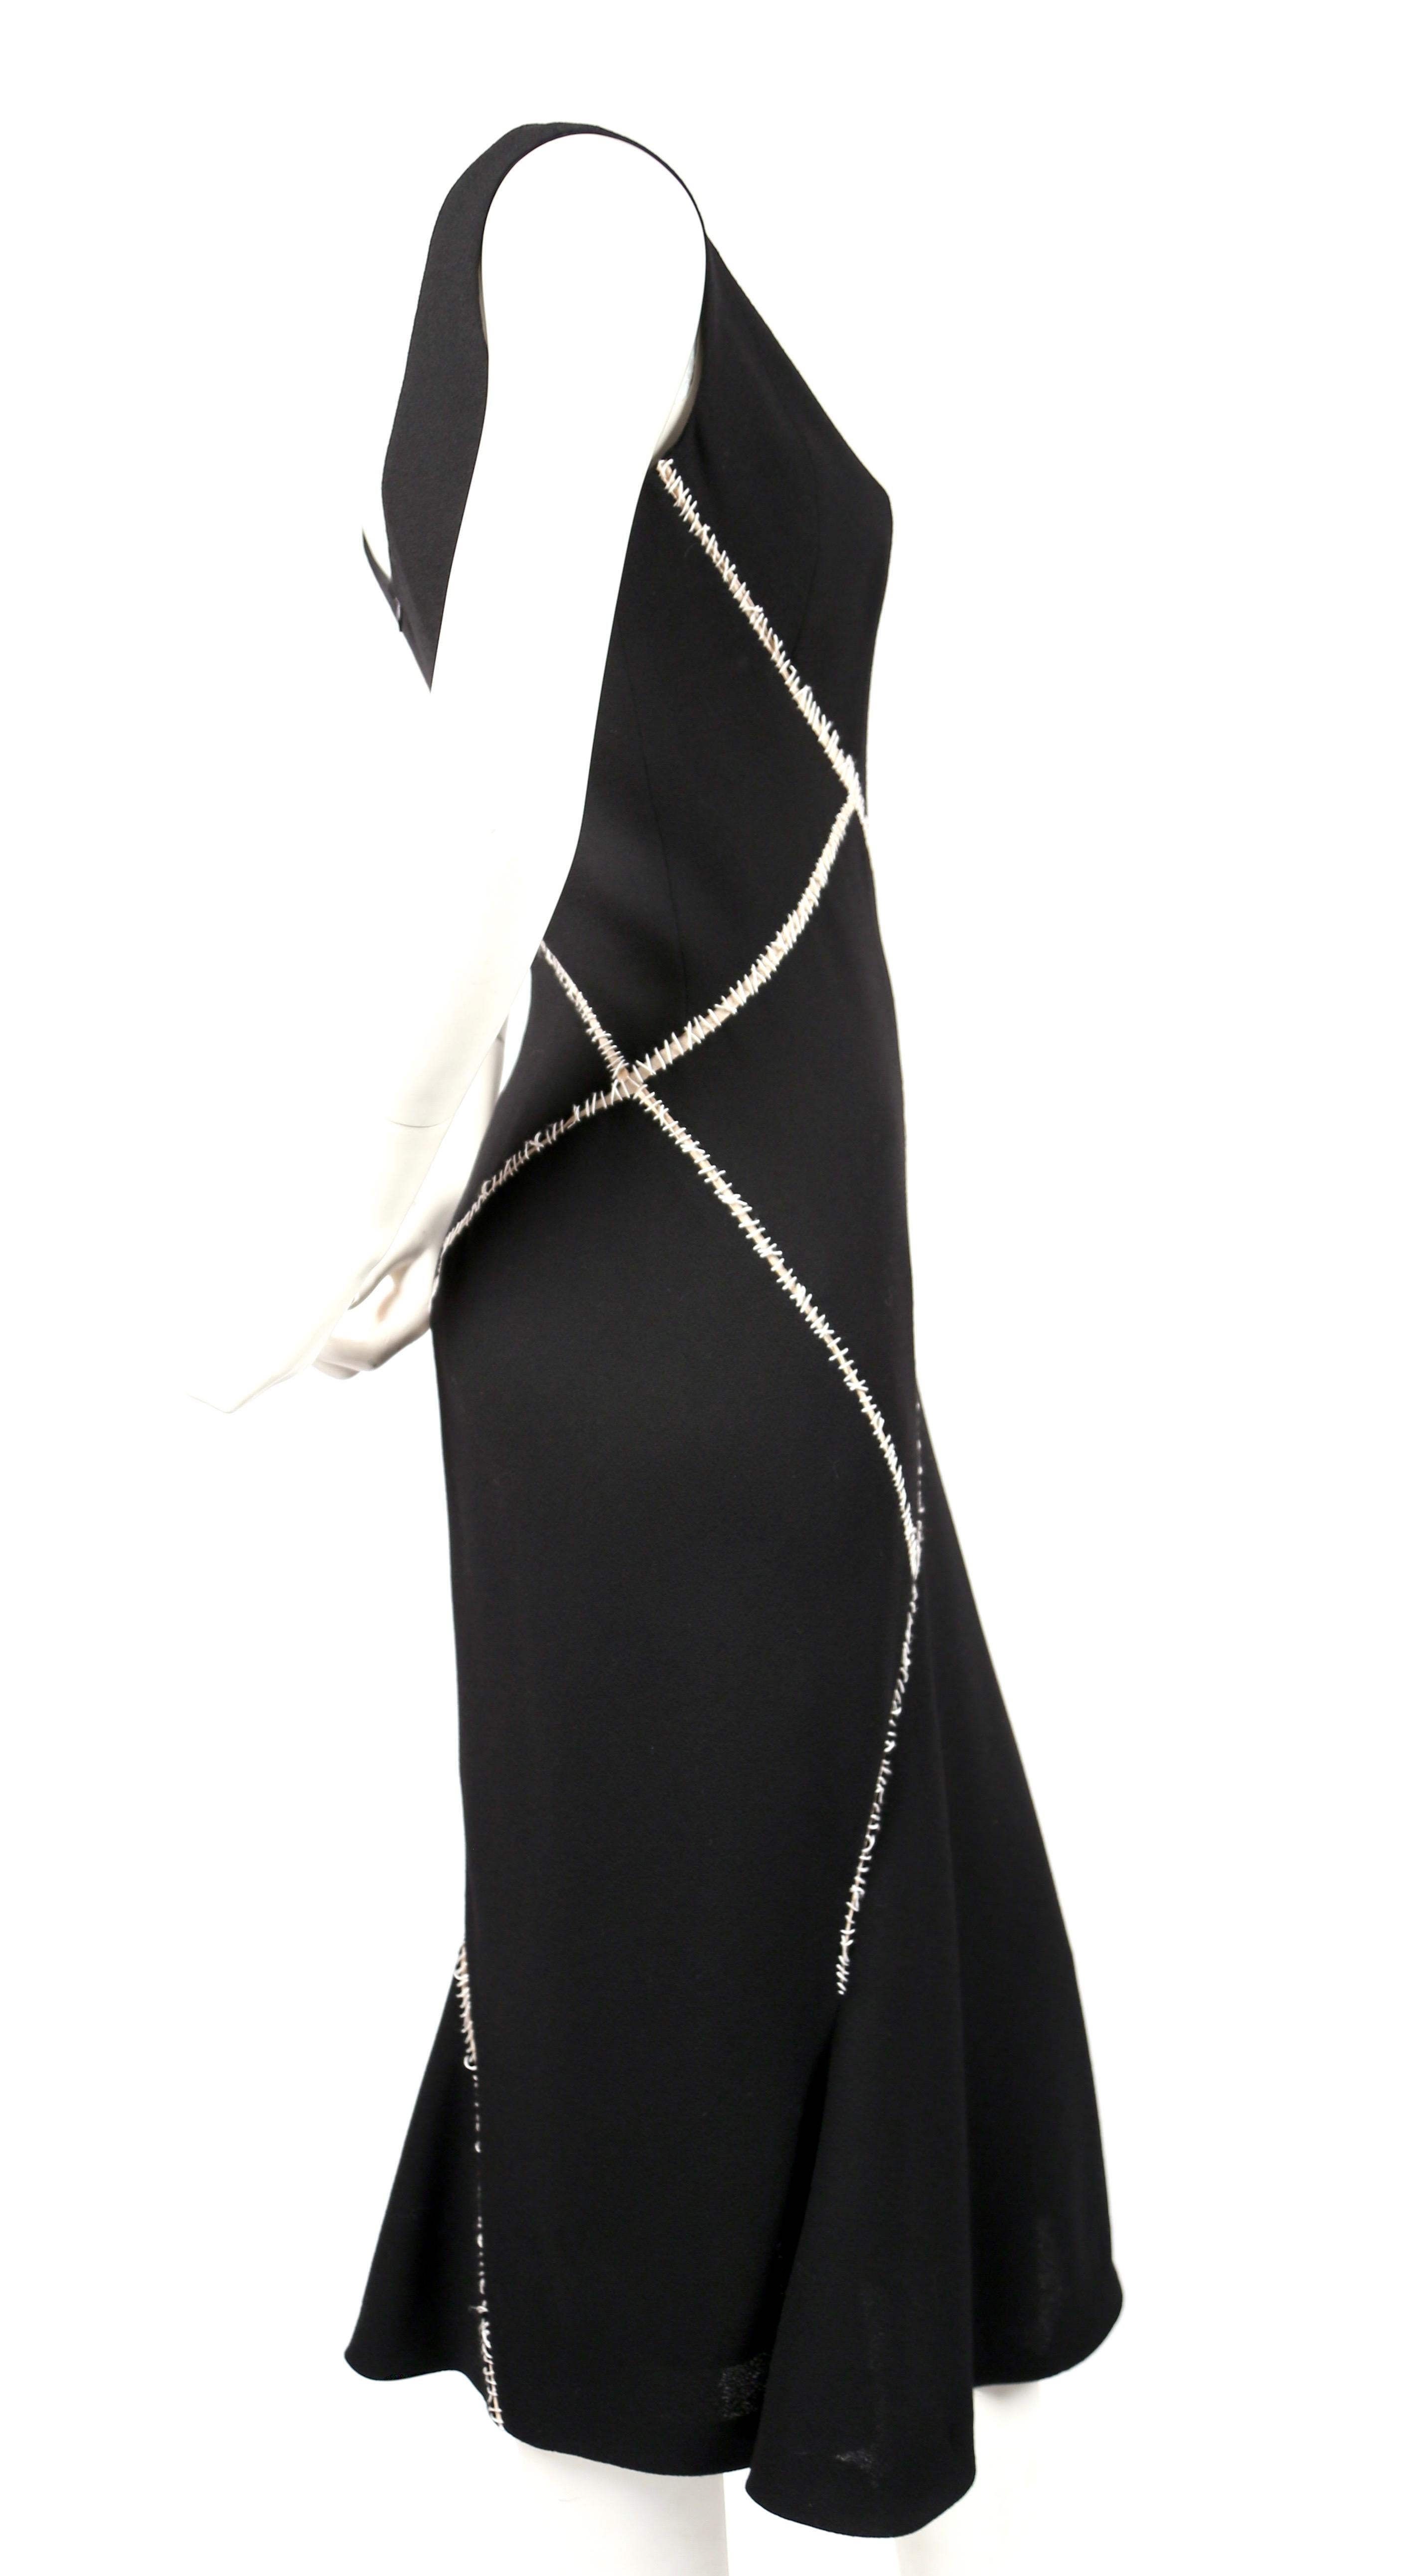 2004 ALEXANDER MCQUEEN black wool dress with white stitching  For Sale 1